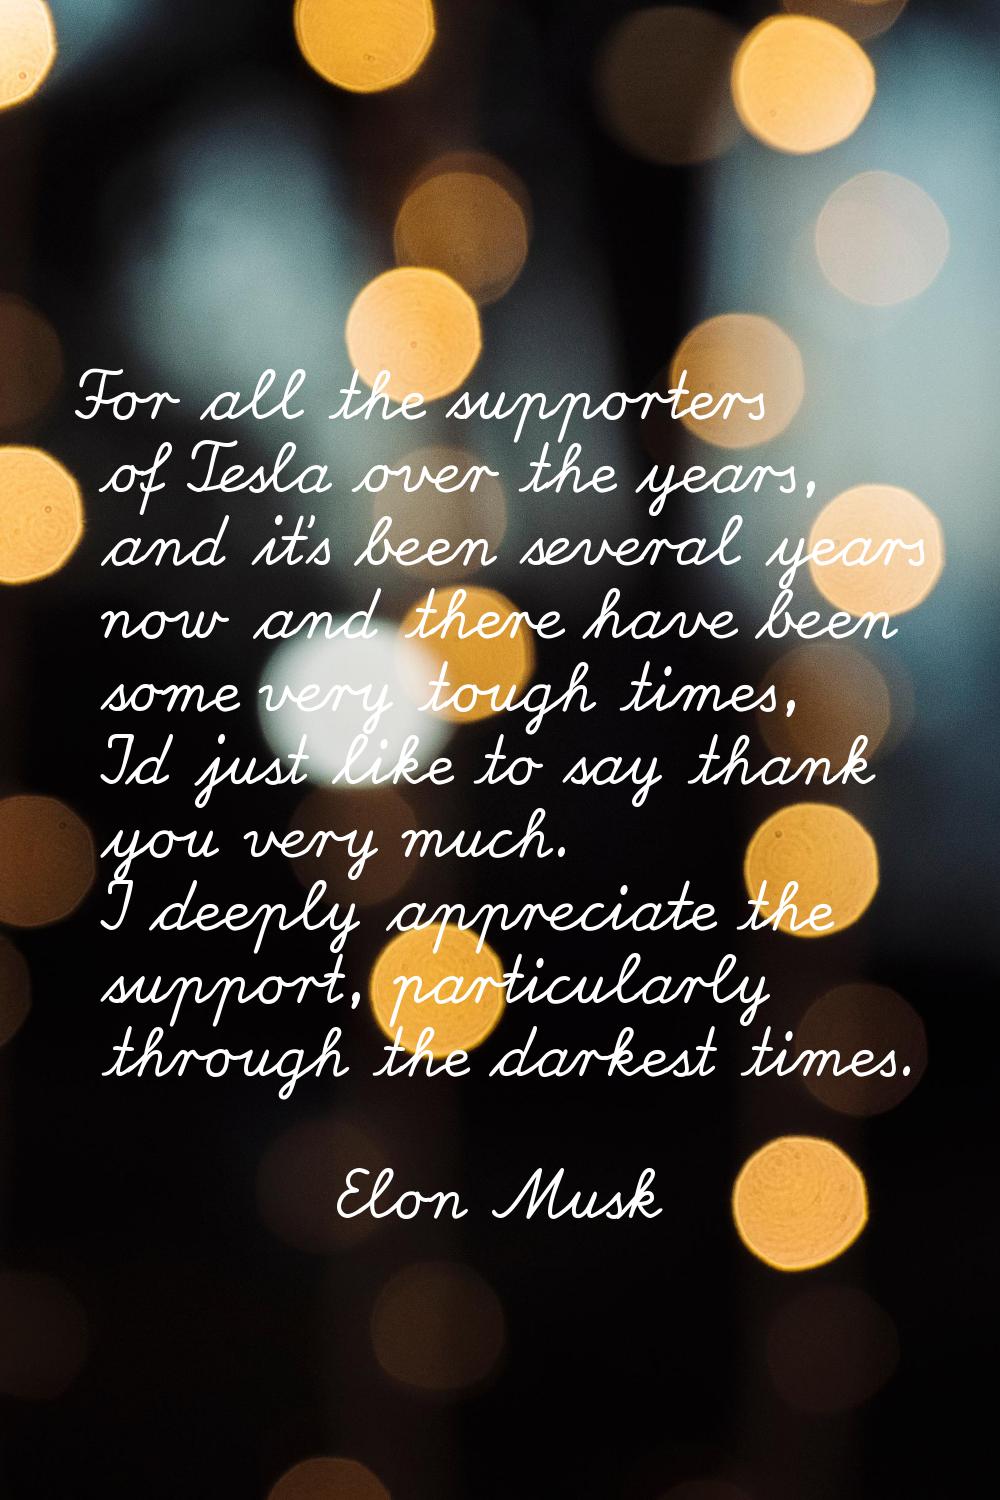 For all the supporters of Tesla over the years, and it's been several years now and there have been